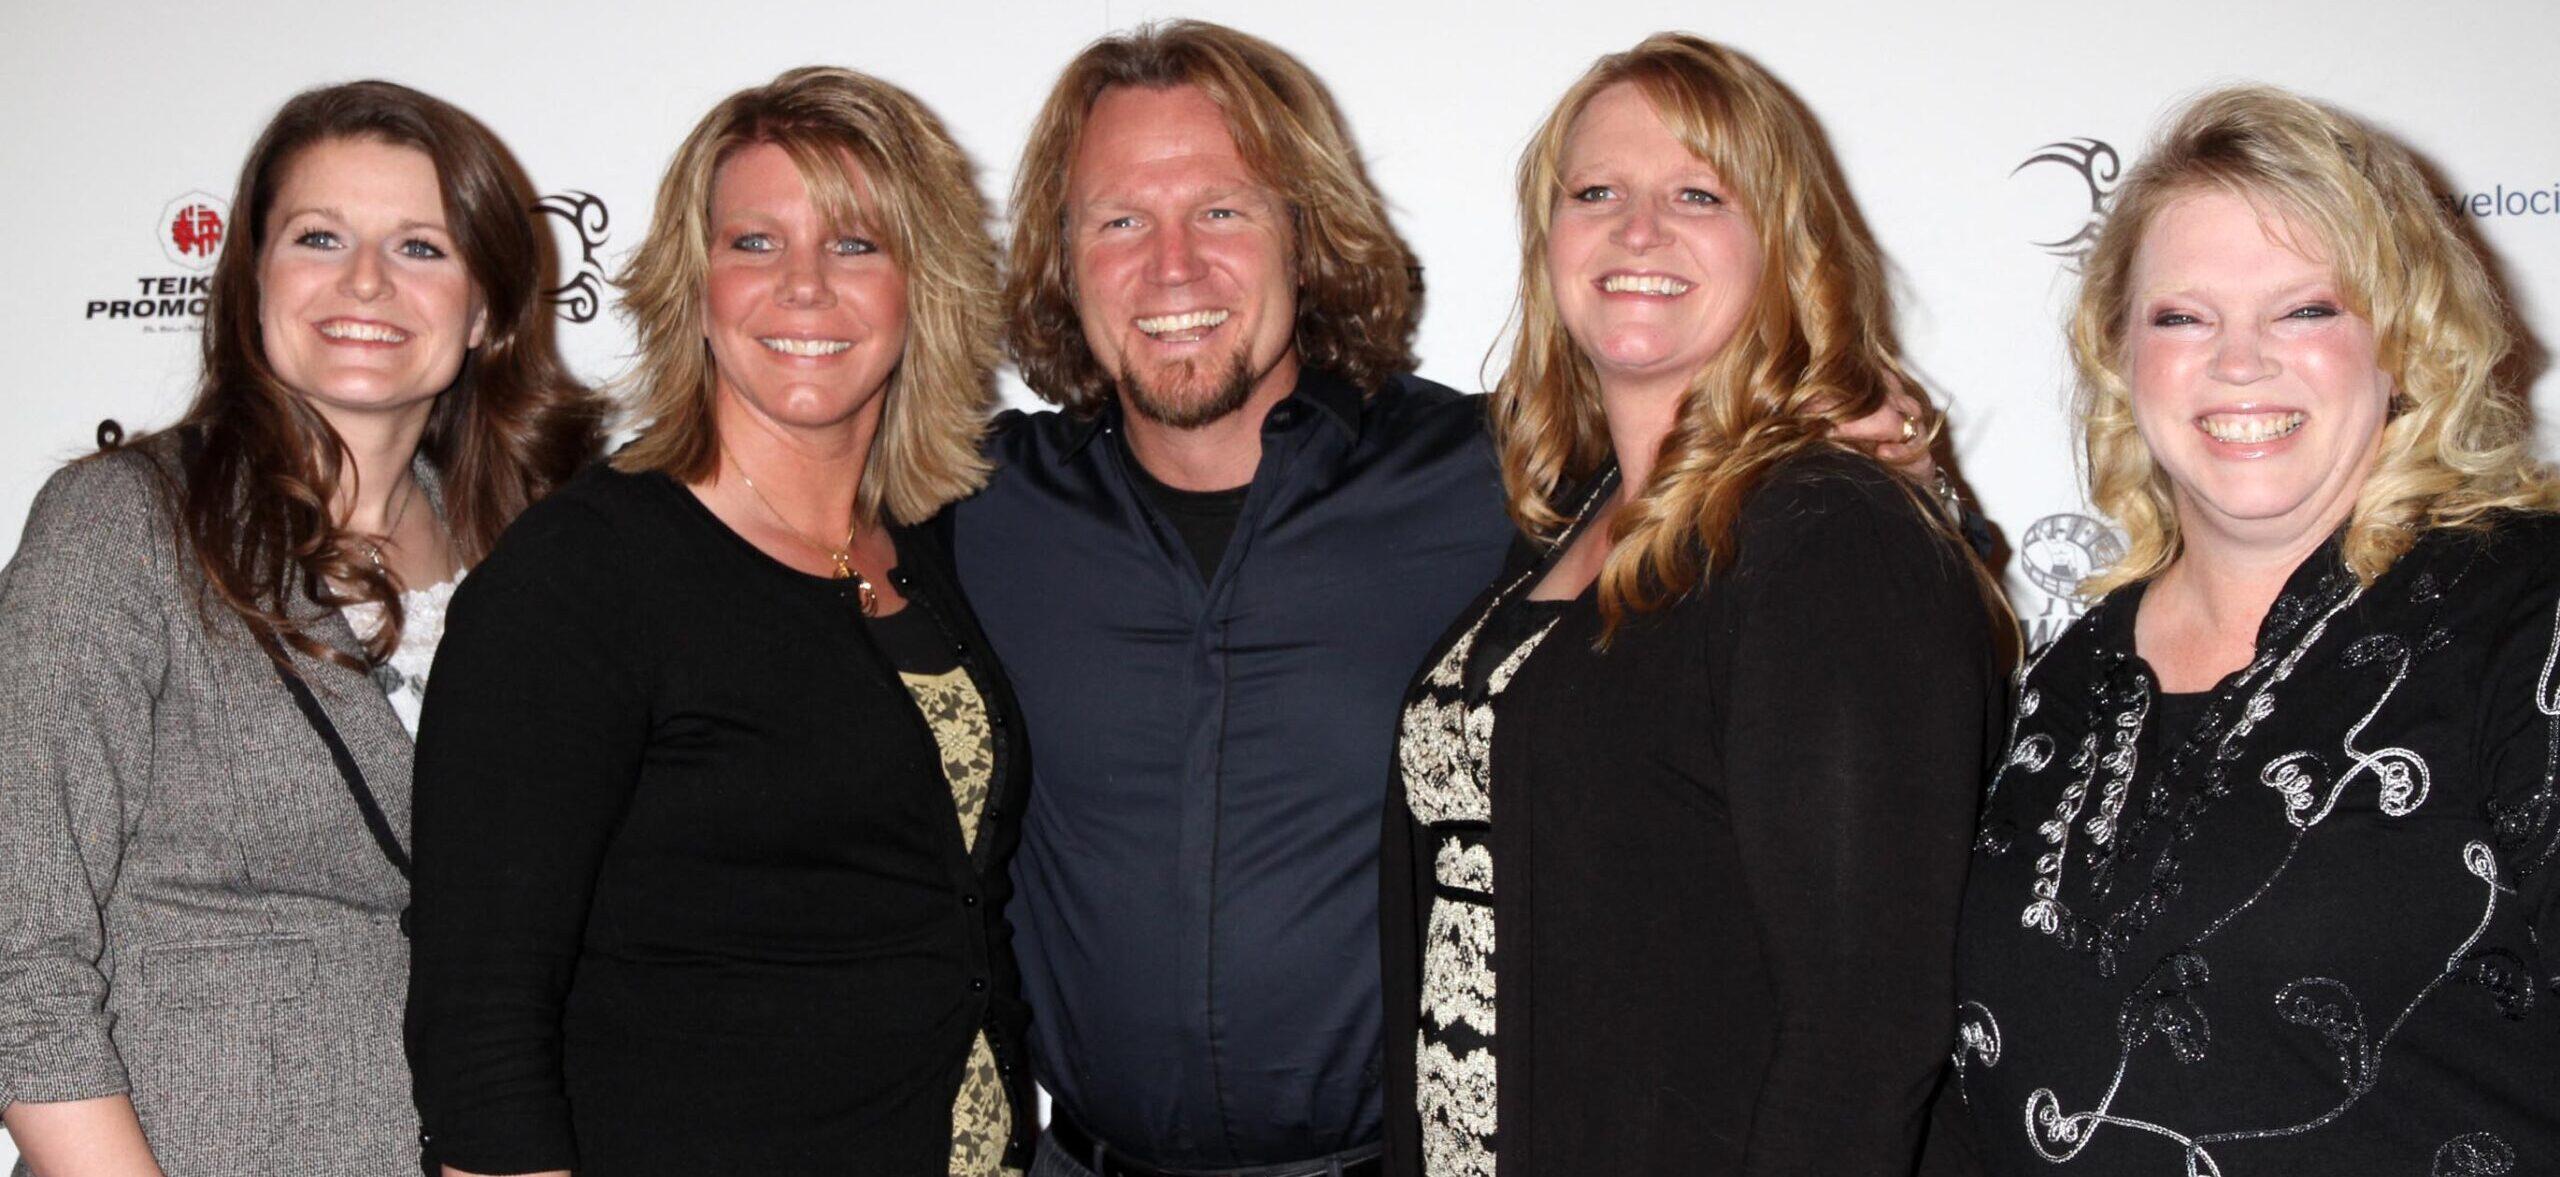 ‘Sister Wives’ Janelle Brown Describes Christine’s New Marriage As ‘The Healing Balm’